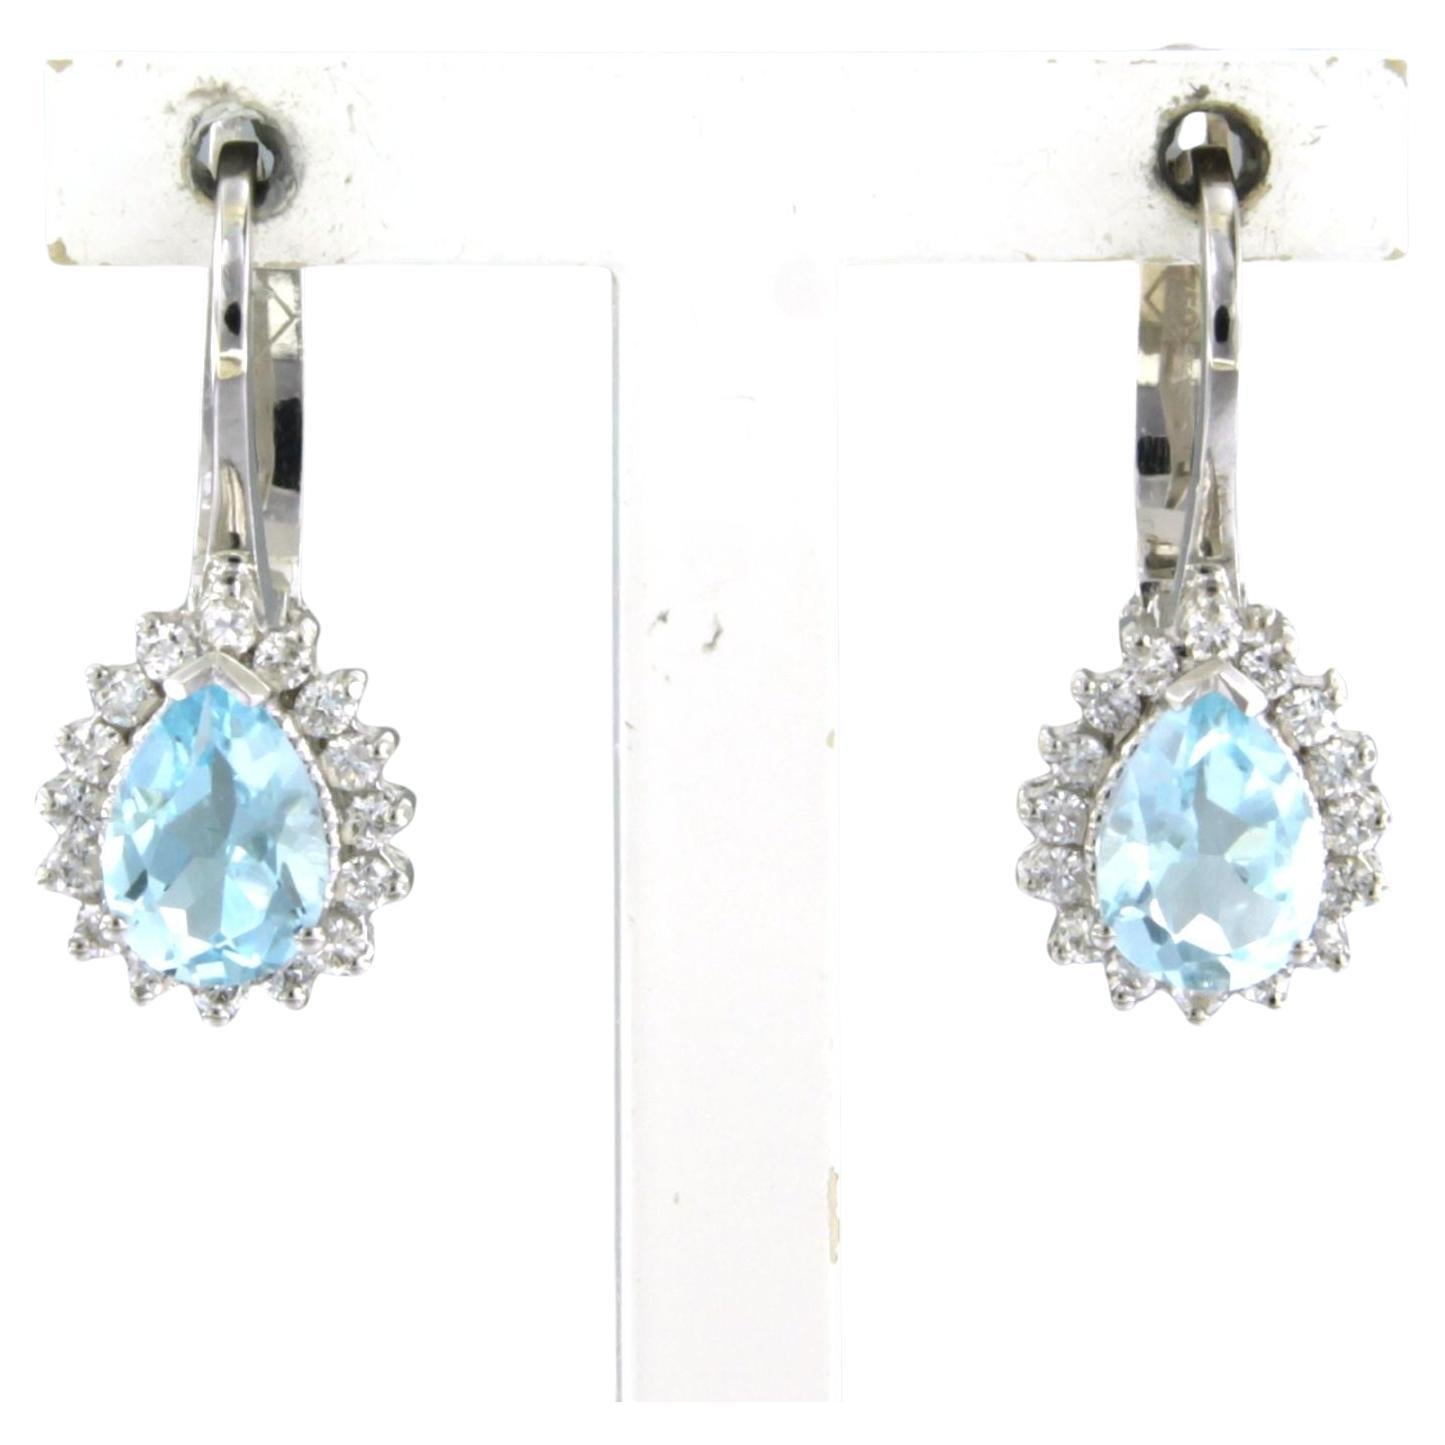 Earrings with Topaz and Diamond 18k white gold